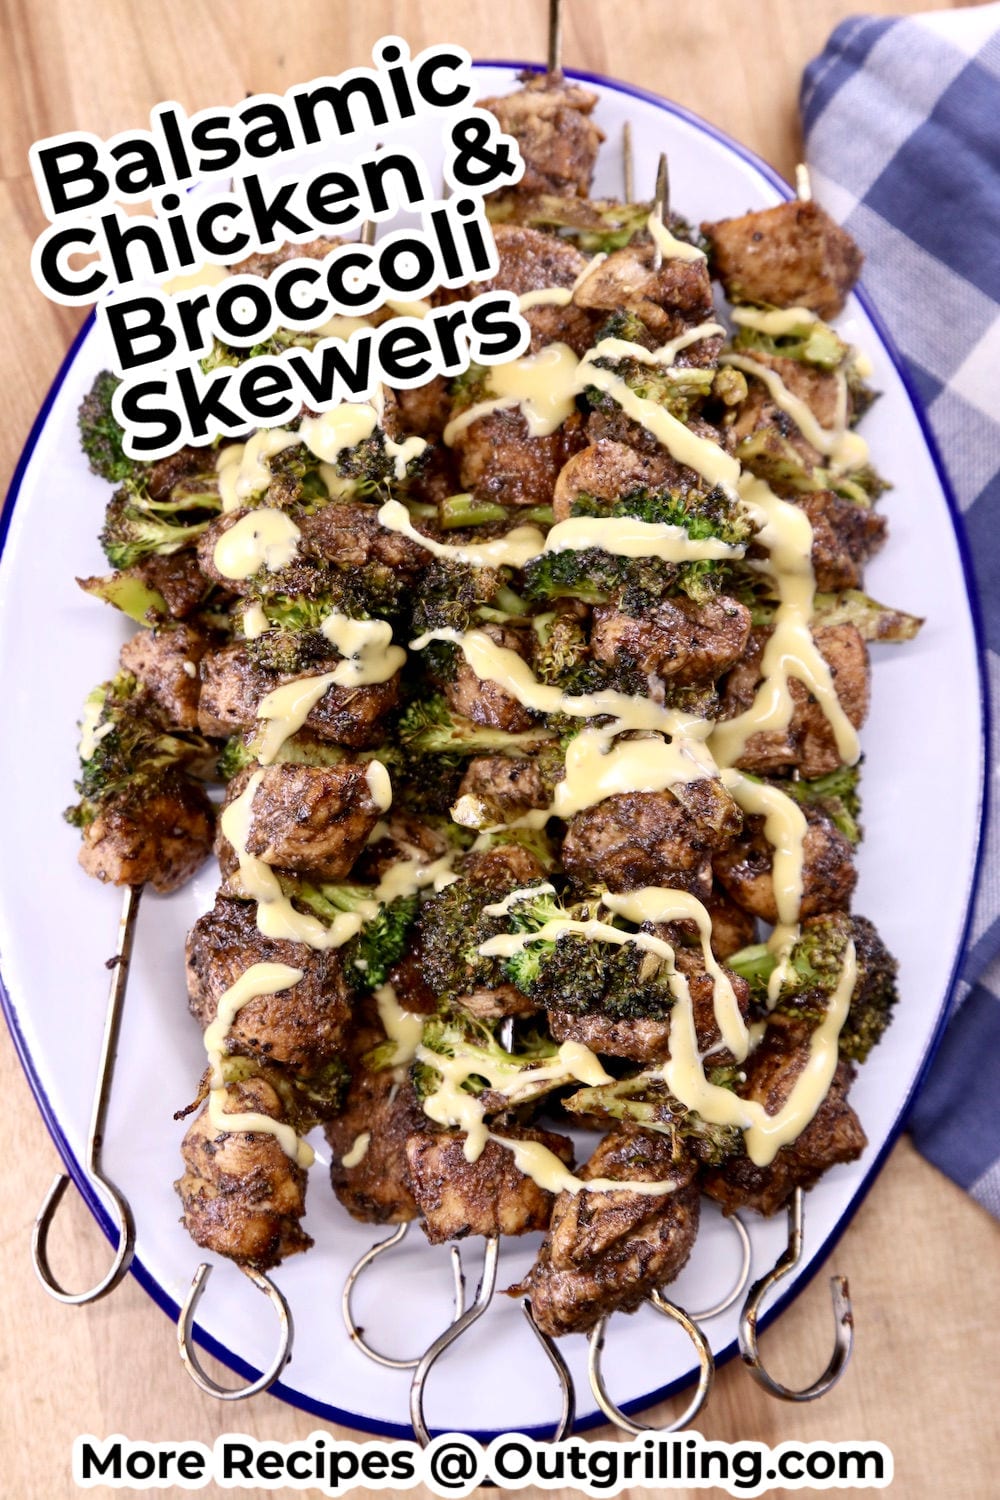 Chicken Broccoli Skewers drizzled with cheese sauce on a platter - text overlay